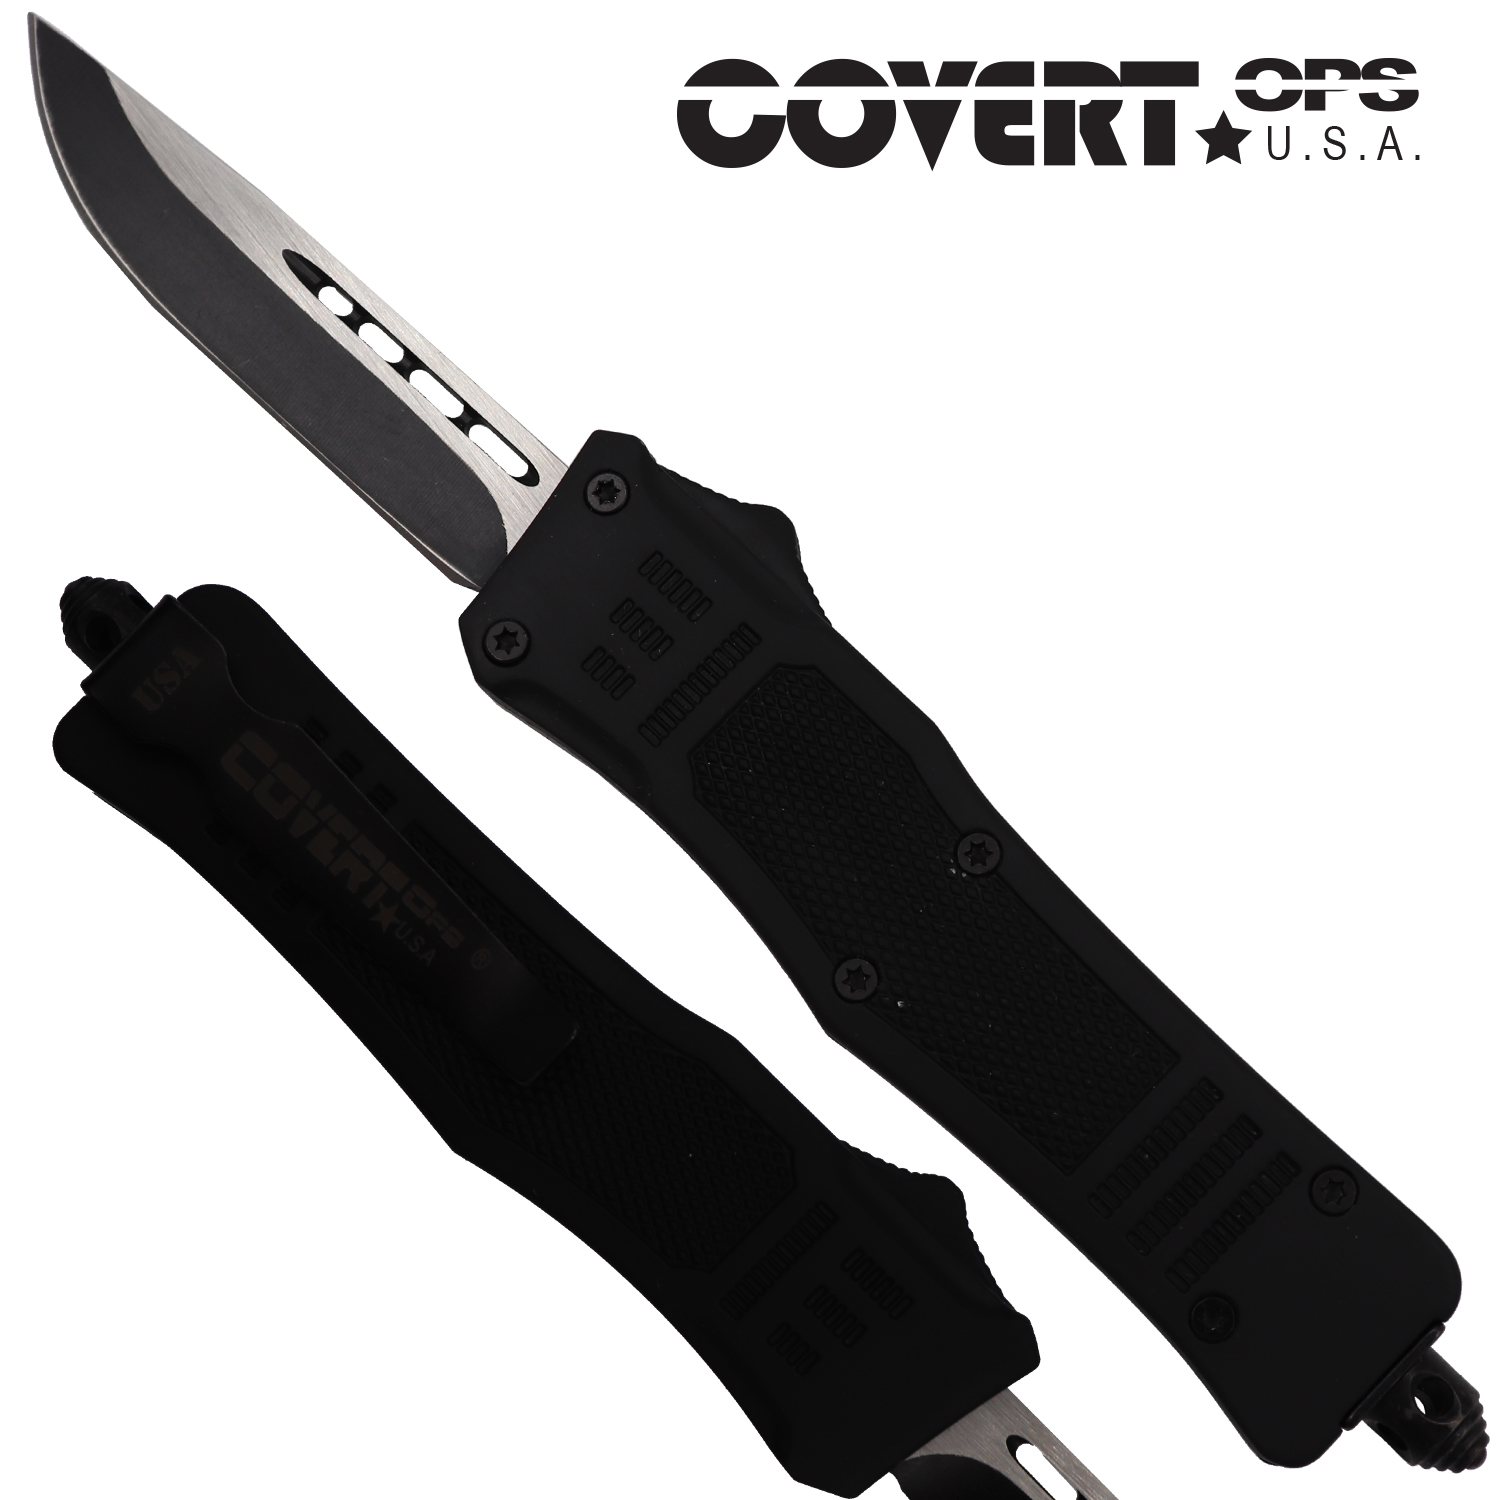 Covert OPS USA OTF Automatic Knife 7 inch overall Black Handle Two Tone Drop Point D2 Steel Blade